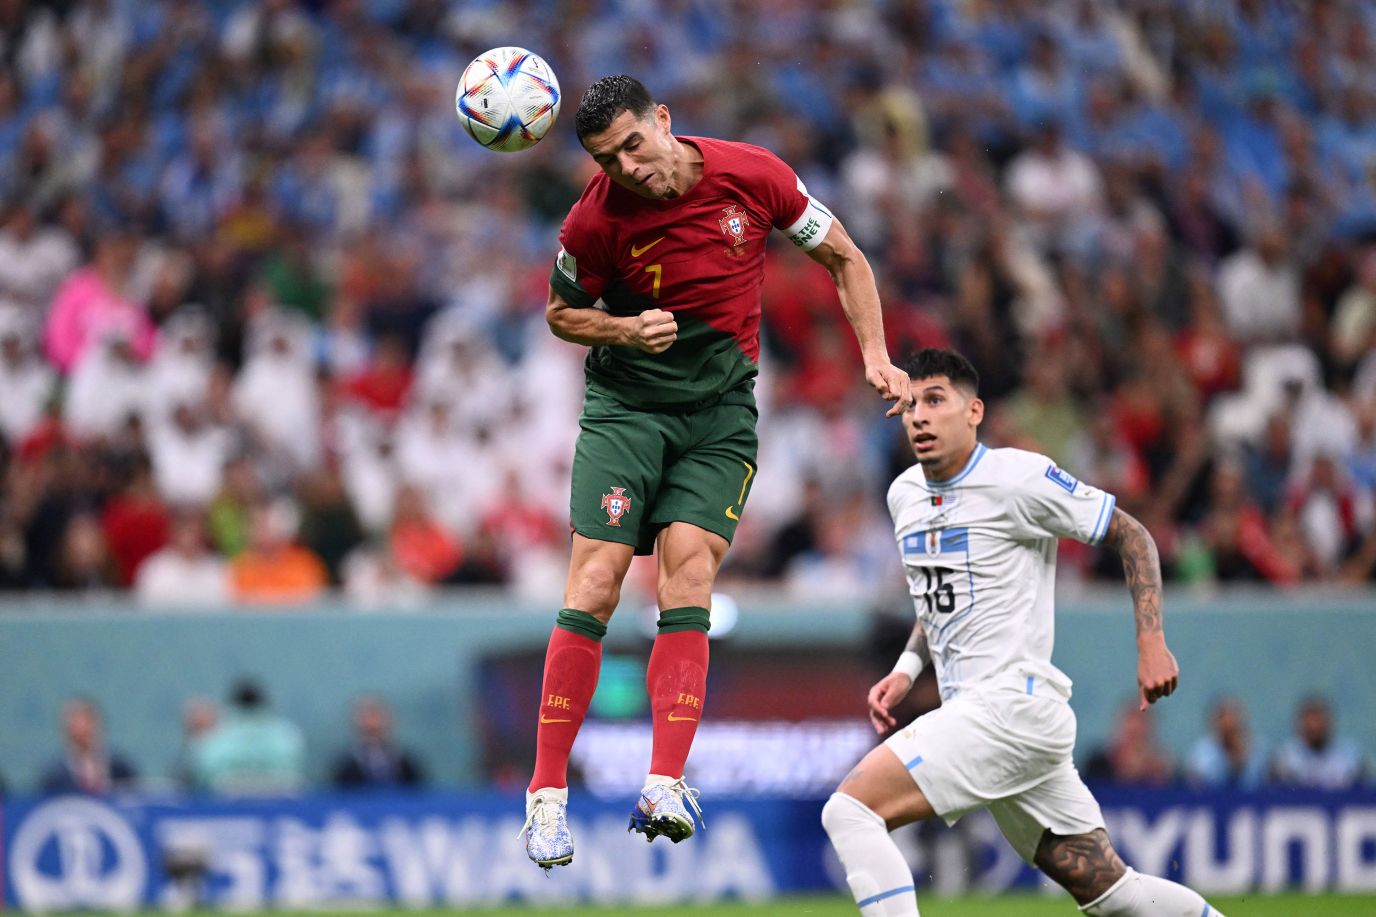 Portugal forward Cristiano Ronaldo tries to head the ball toward goal in the second half. He appeared at first to nod in the first goal, but after review it was determined that he didn't touch it and Bruno was credited with the goal.